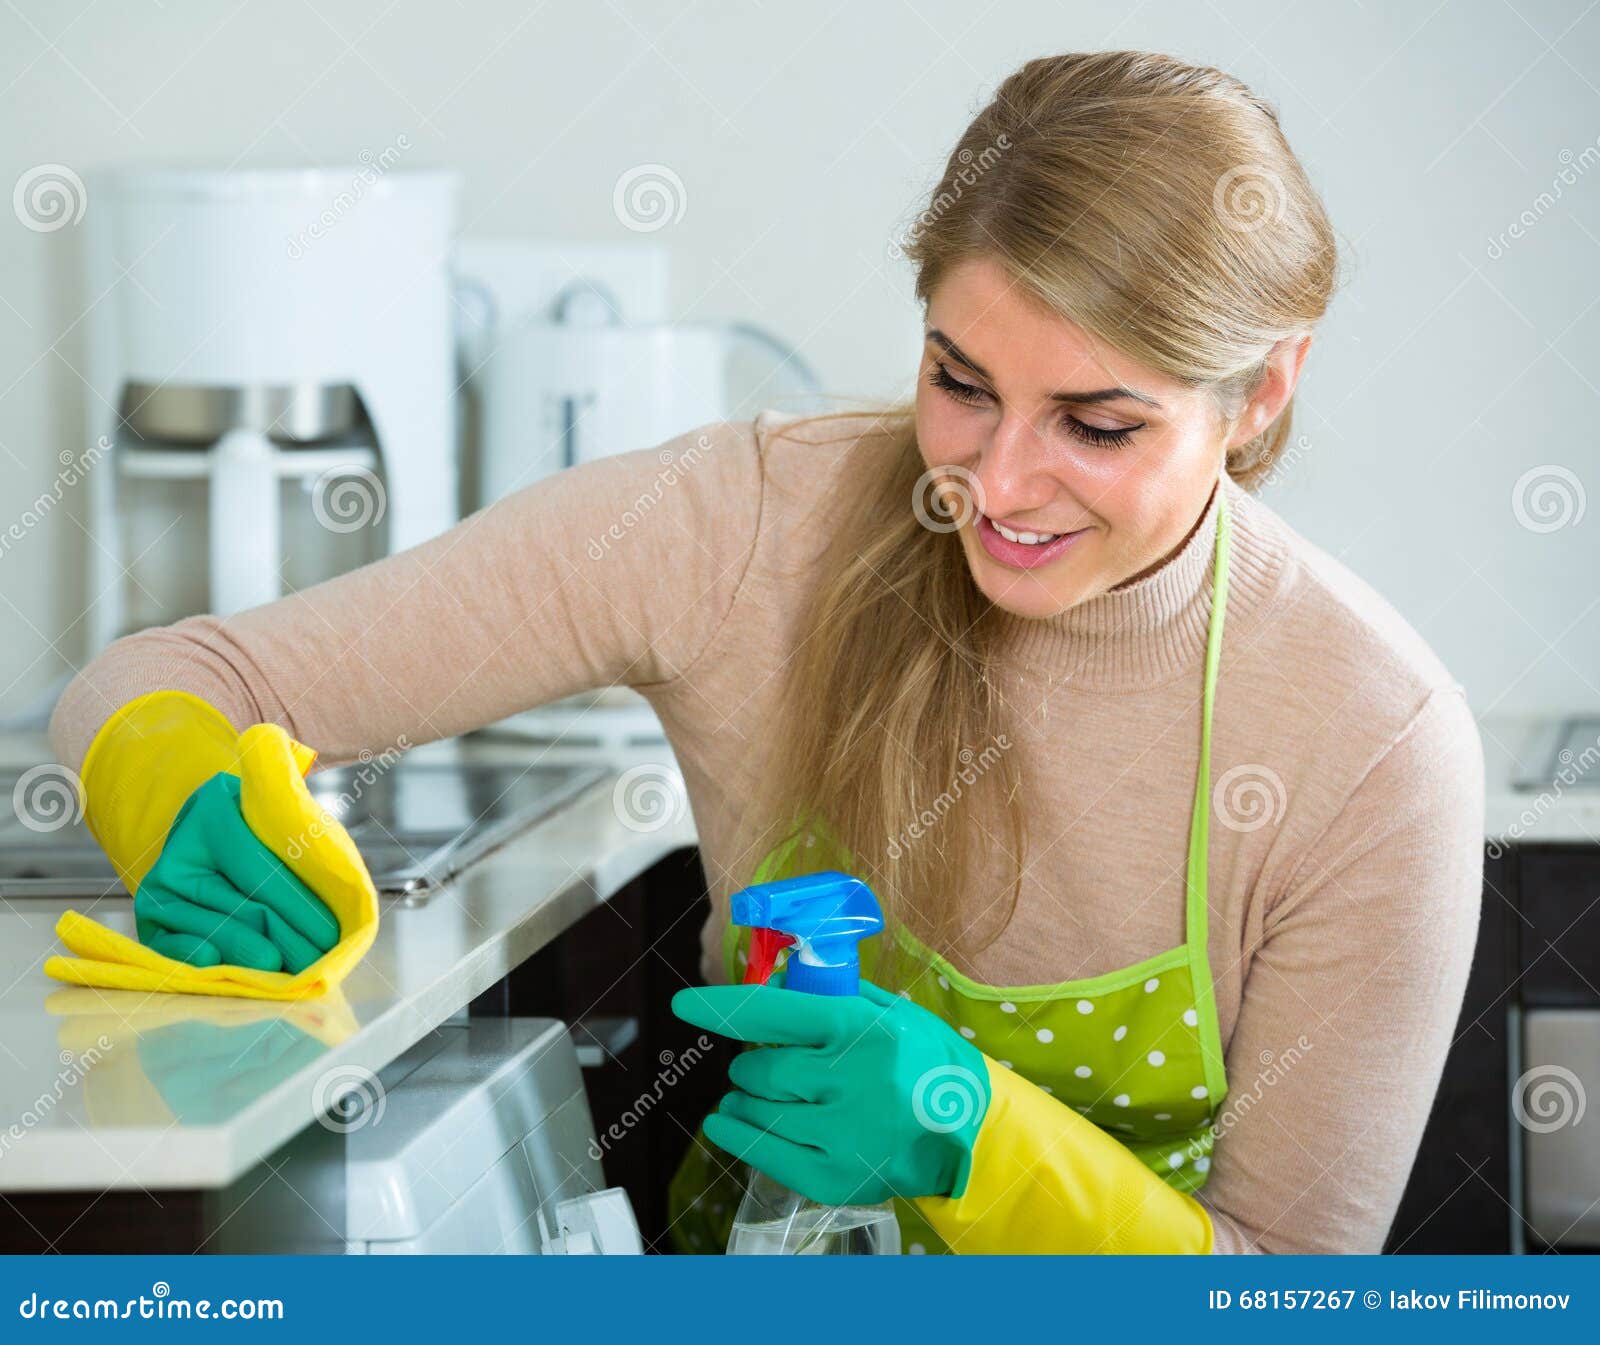 Housewife Cleaning In Home Kitchen Stock Imag